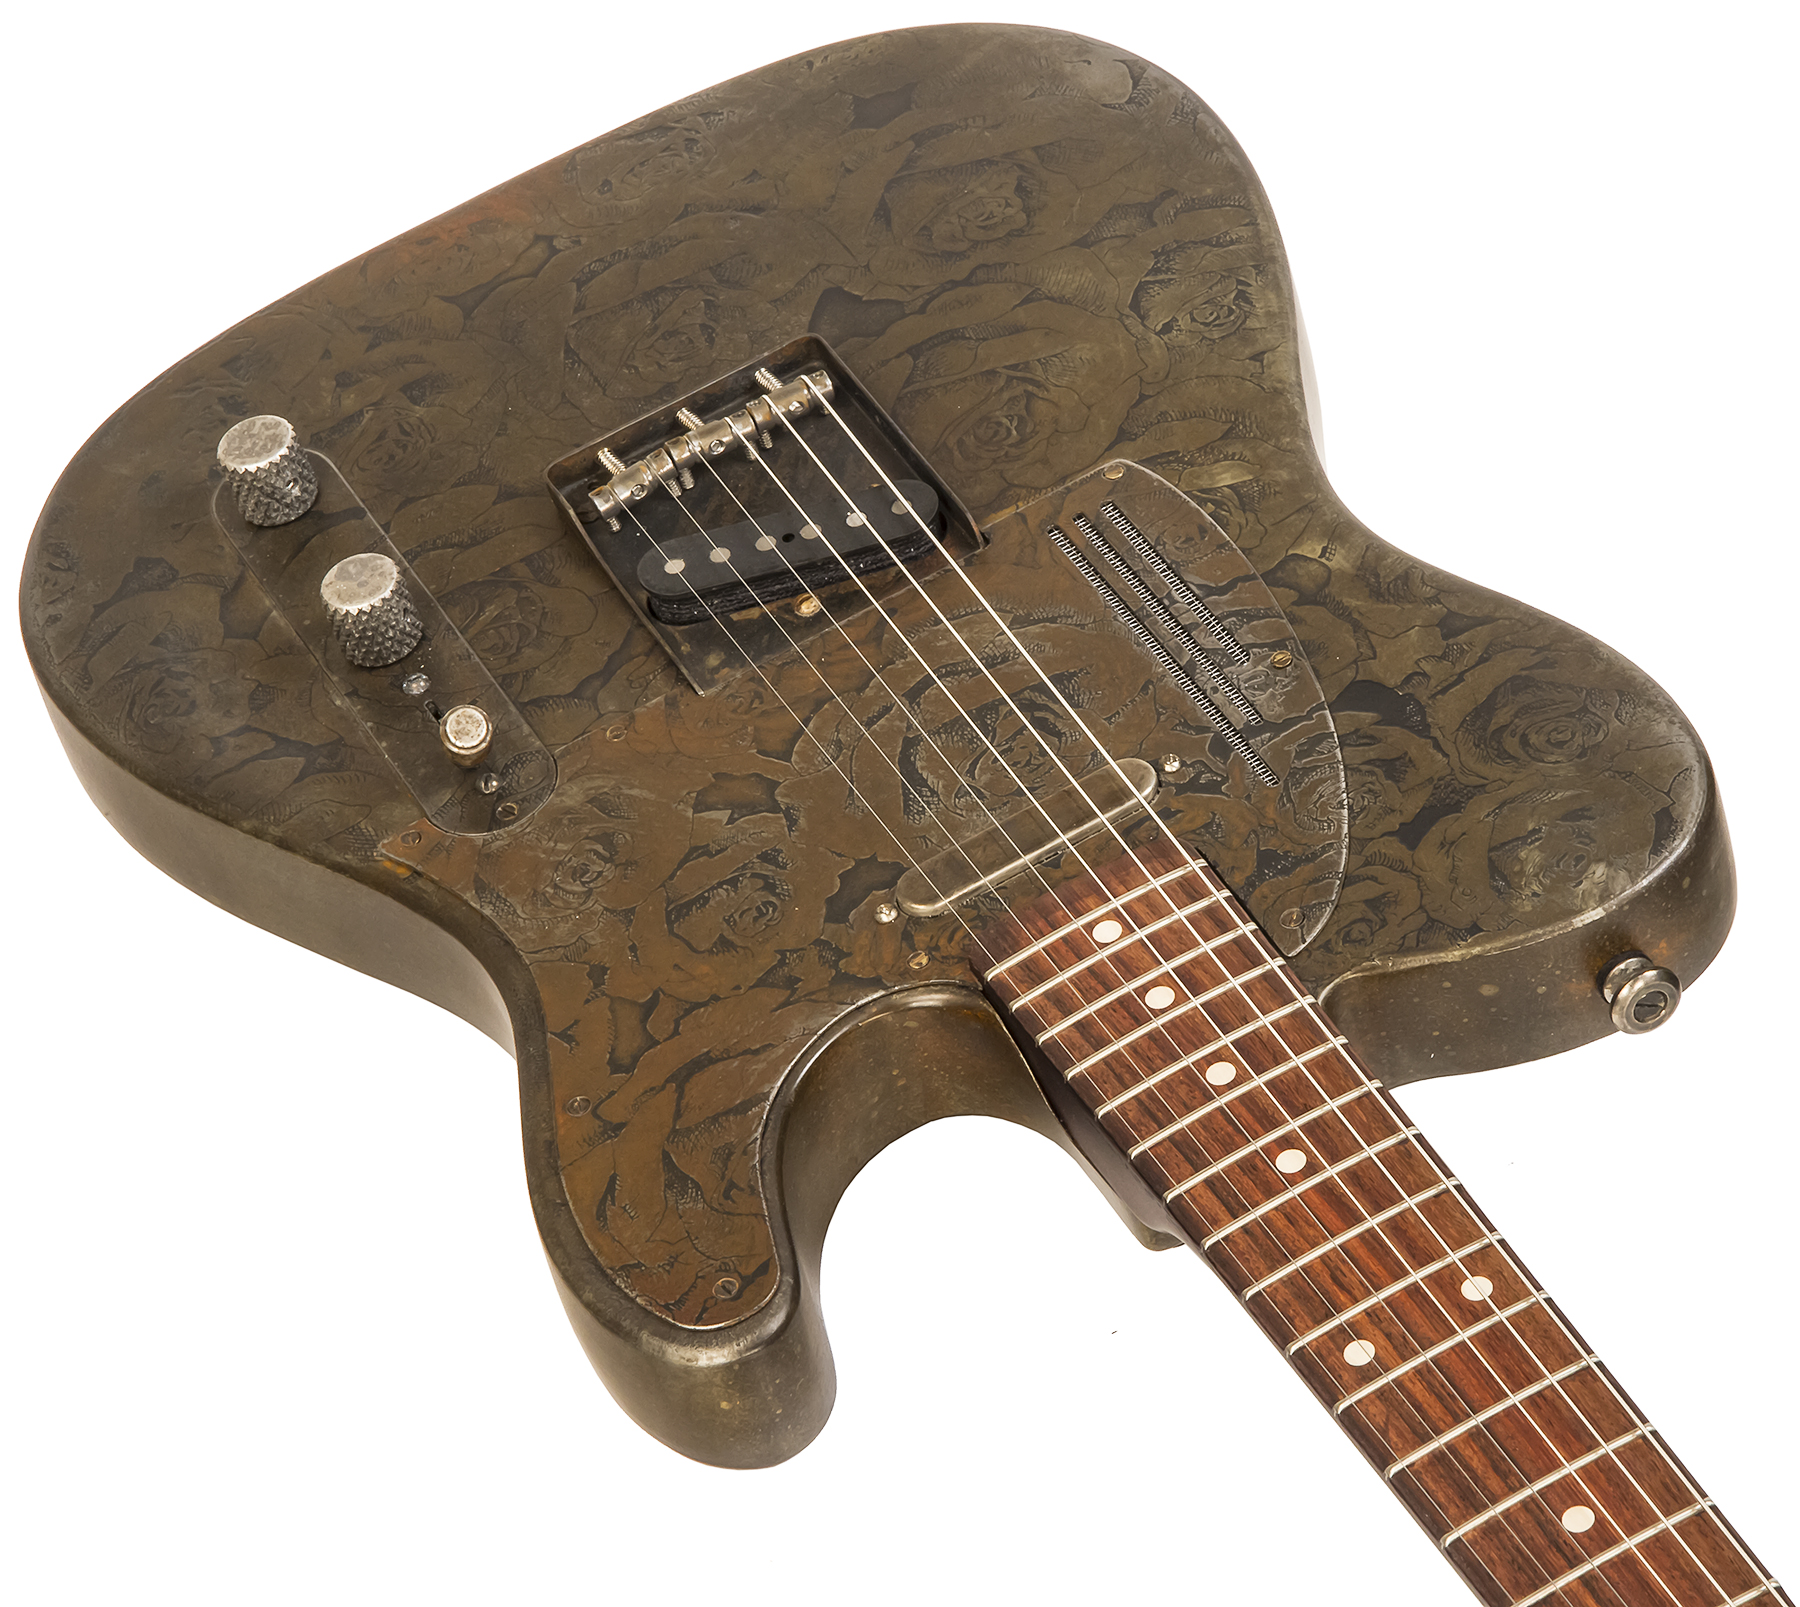 James Trussart Steelcaster Perf.back 2s Ht Rw #21000 - Rusty Roses - Semi-Hollow E-Gitarre - Variation 1